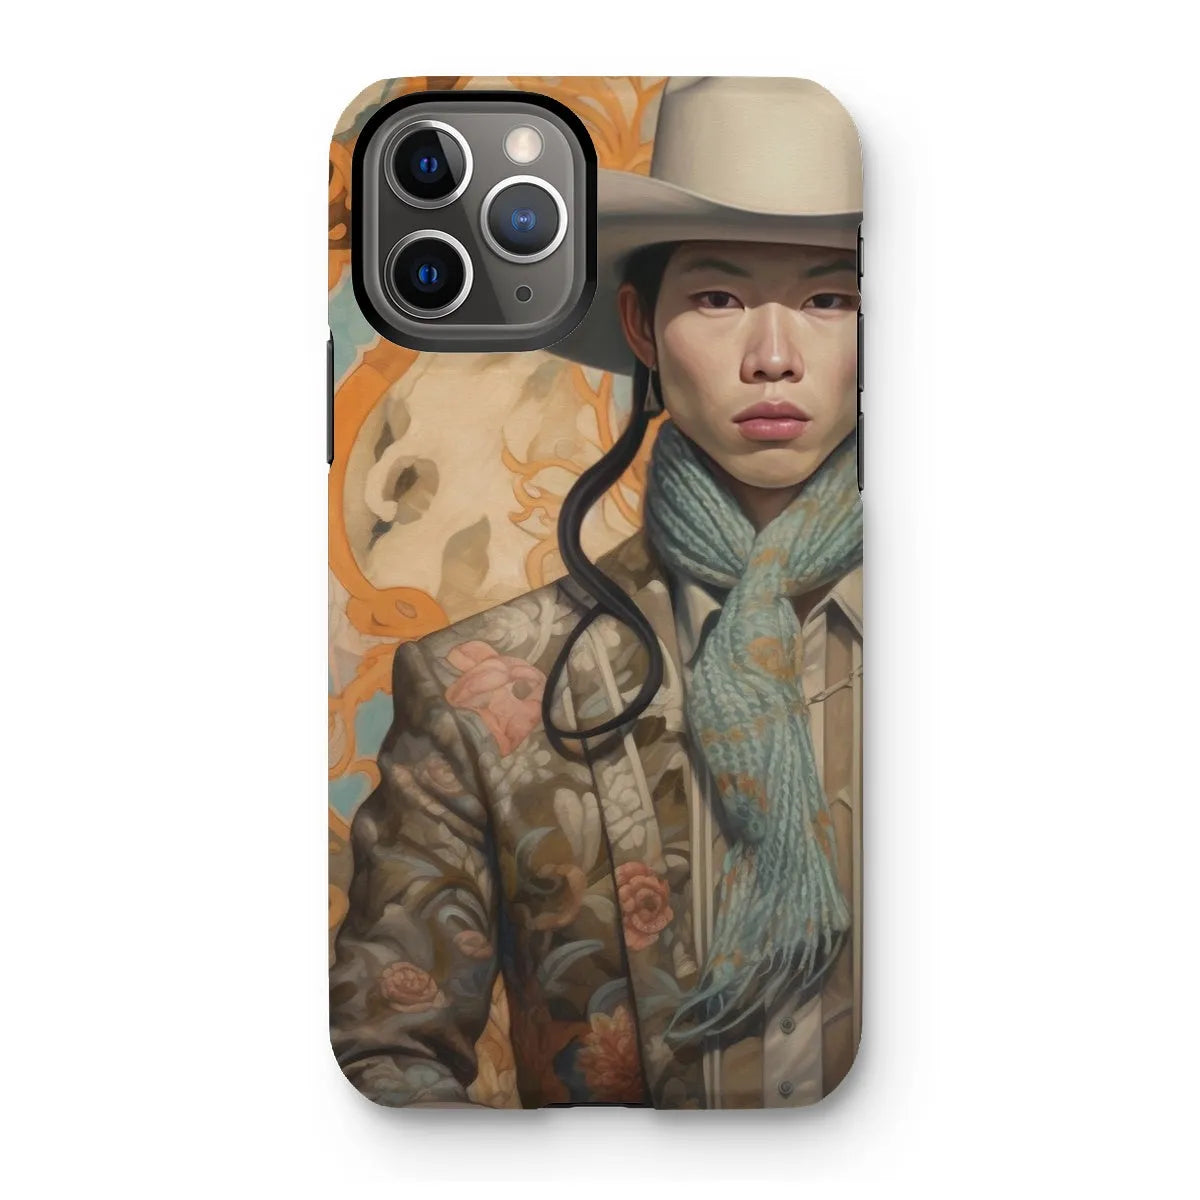 Baihu The Gay Cowboy - Gay Aesthetic Art Phone Case - Iphone 11 Pro / Matte - Mobile Phone Cases - Aesthetic Art